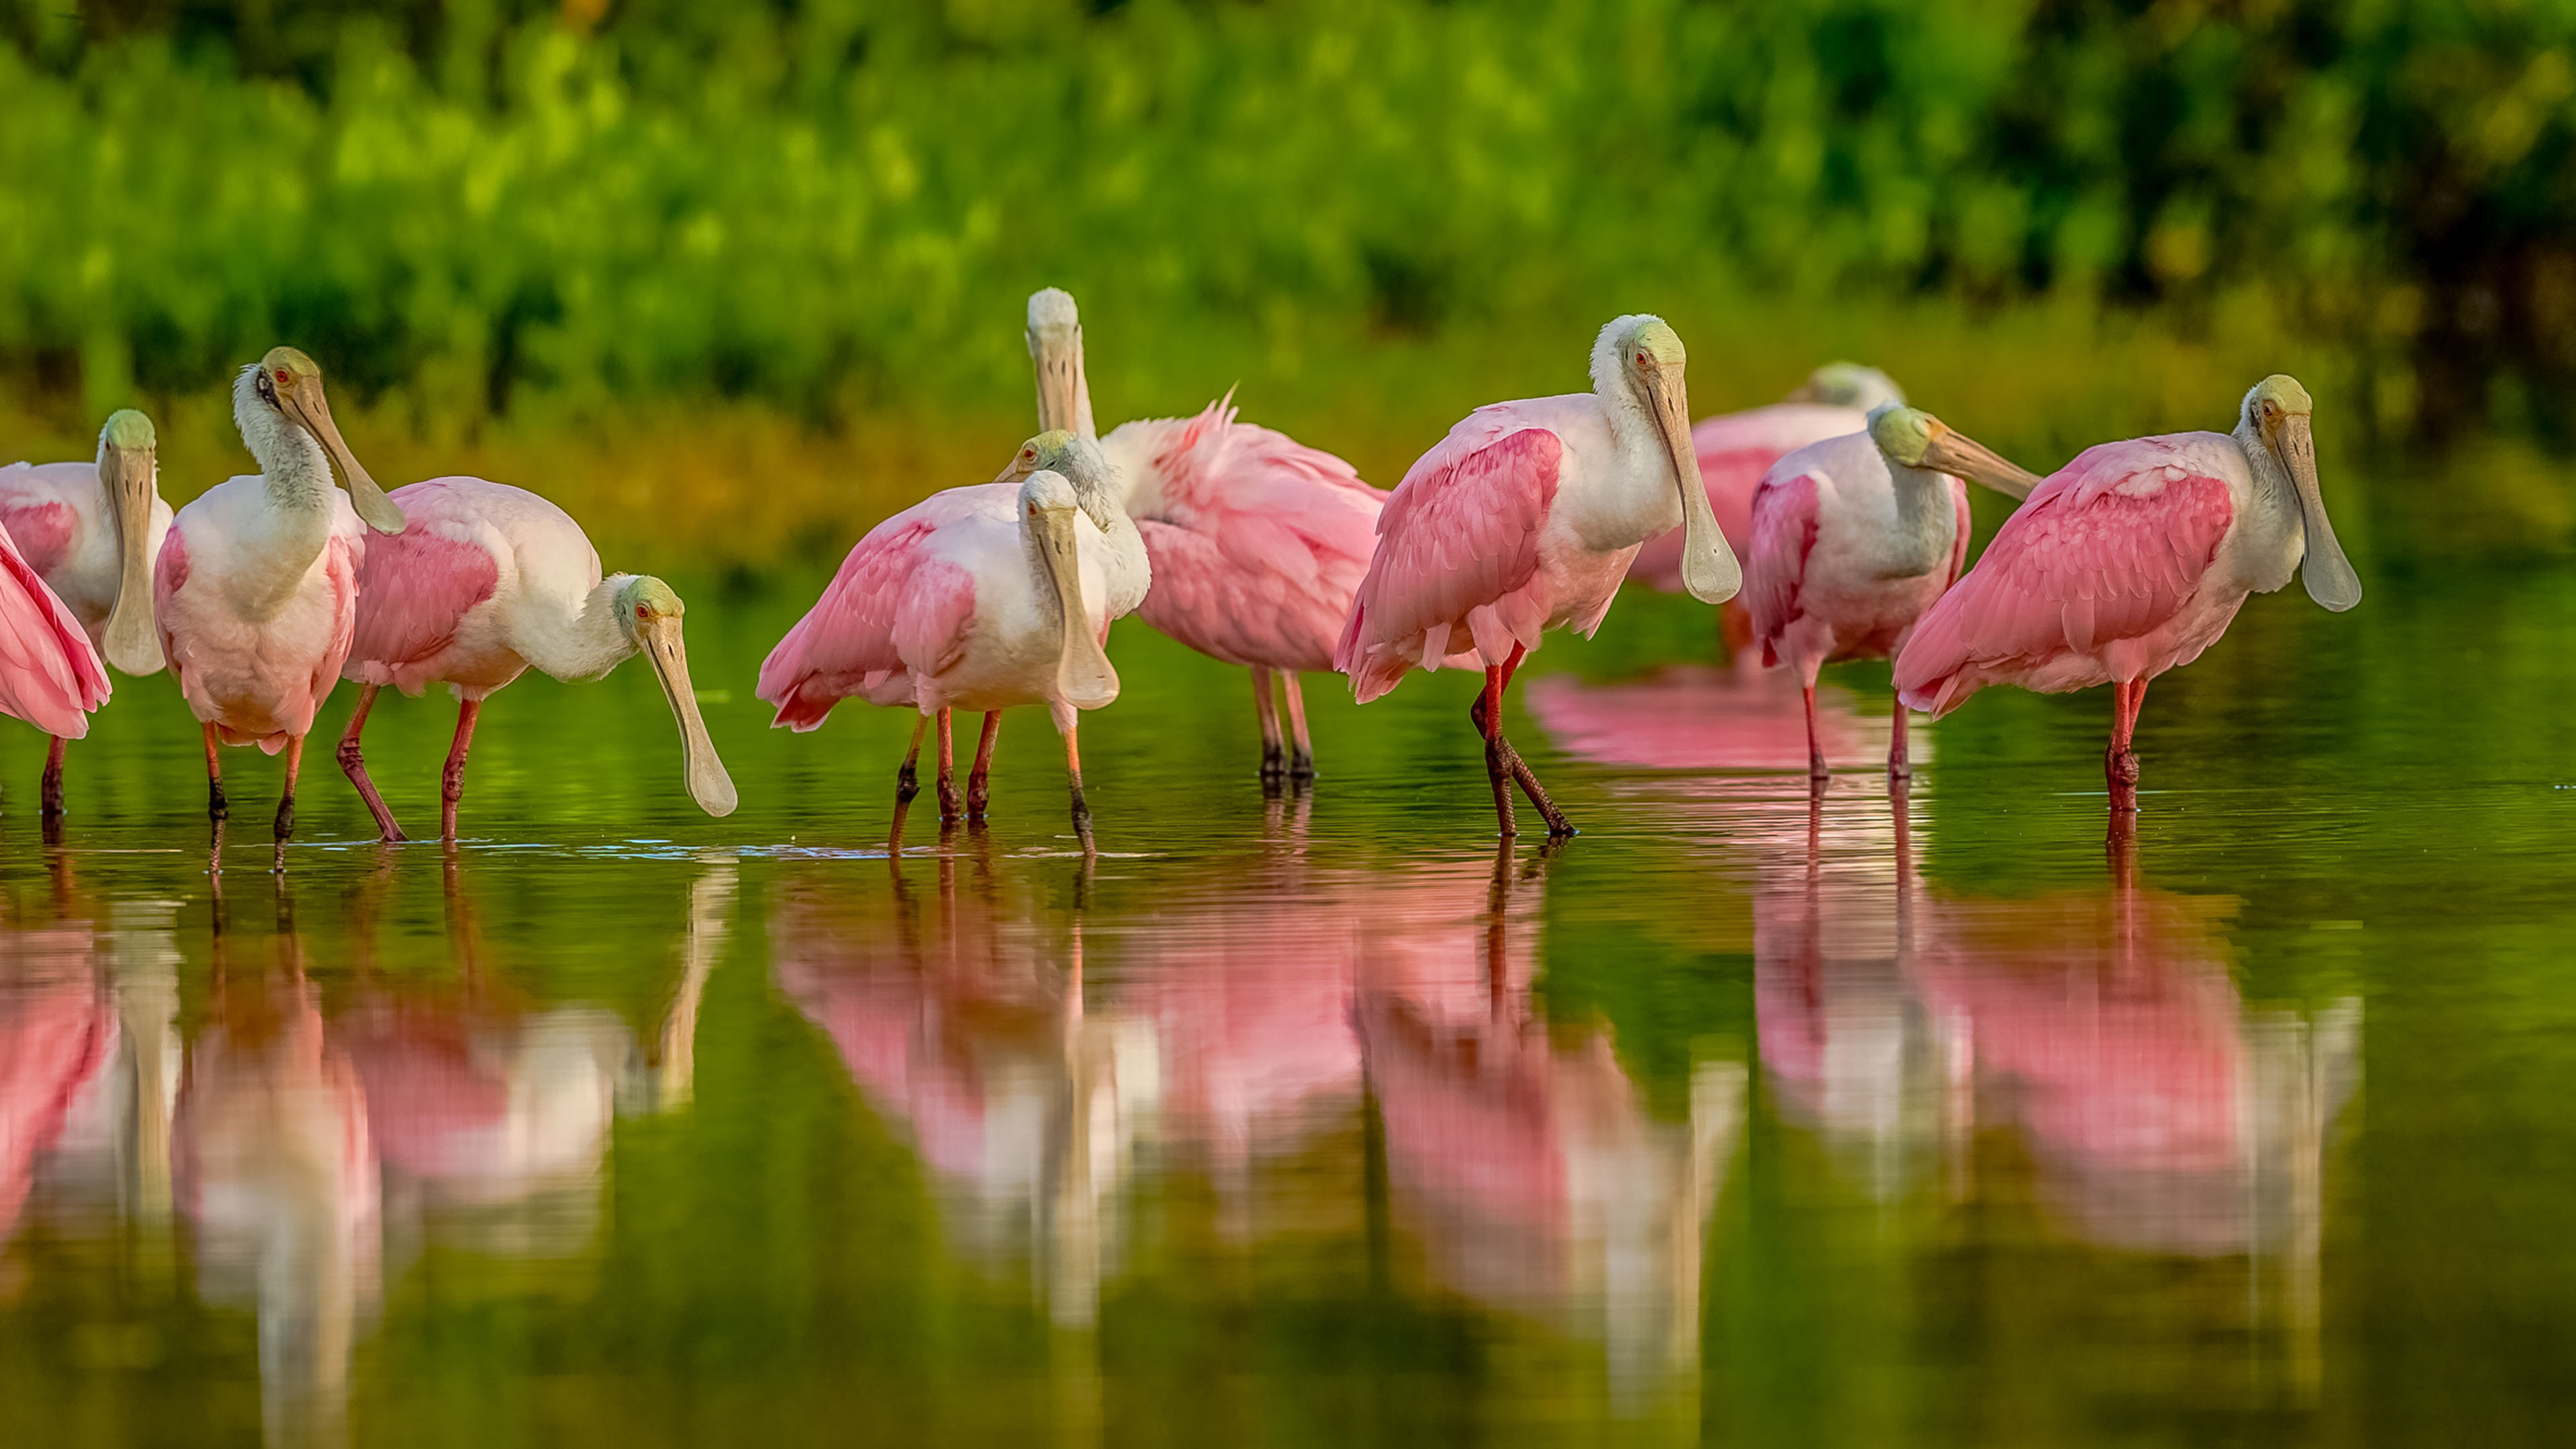 Roseate Spoonbill Group Birds In Water 4k Ultra Hd Wallpapers For